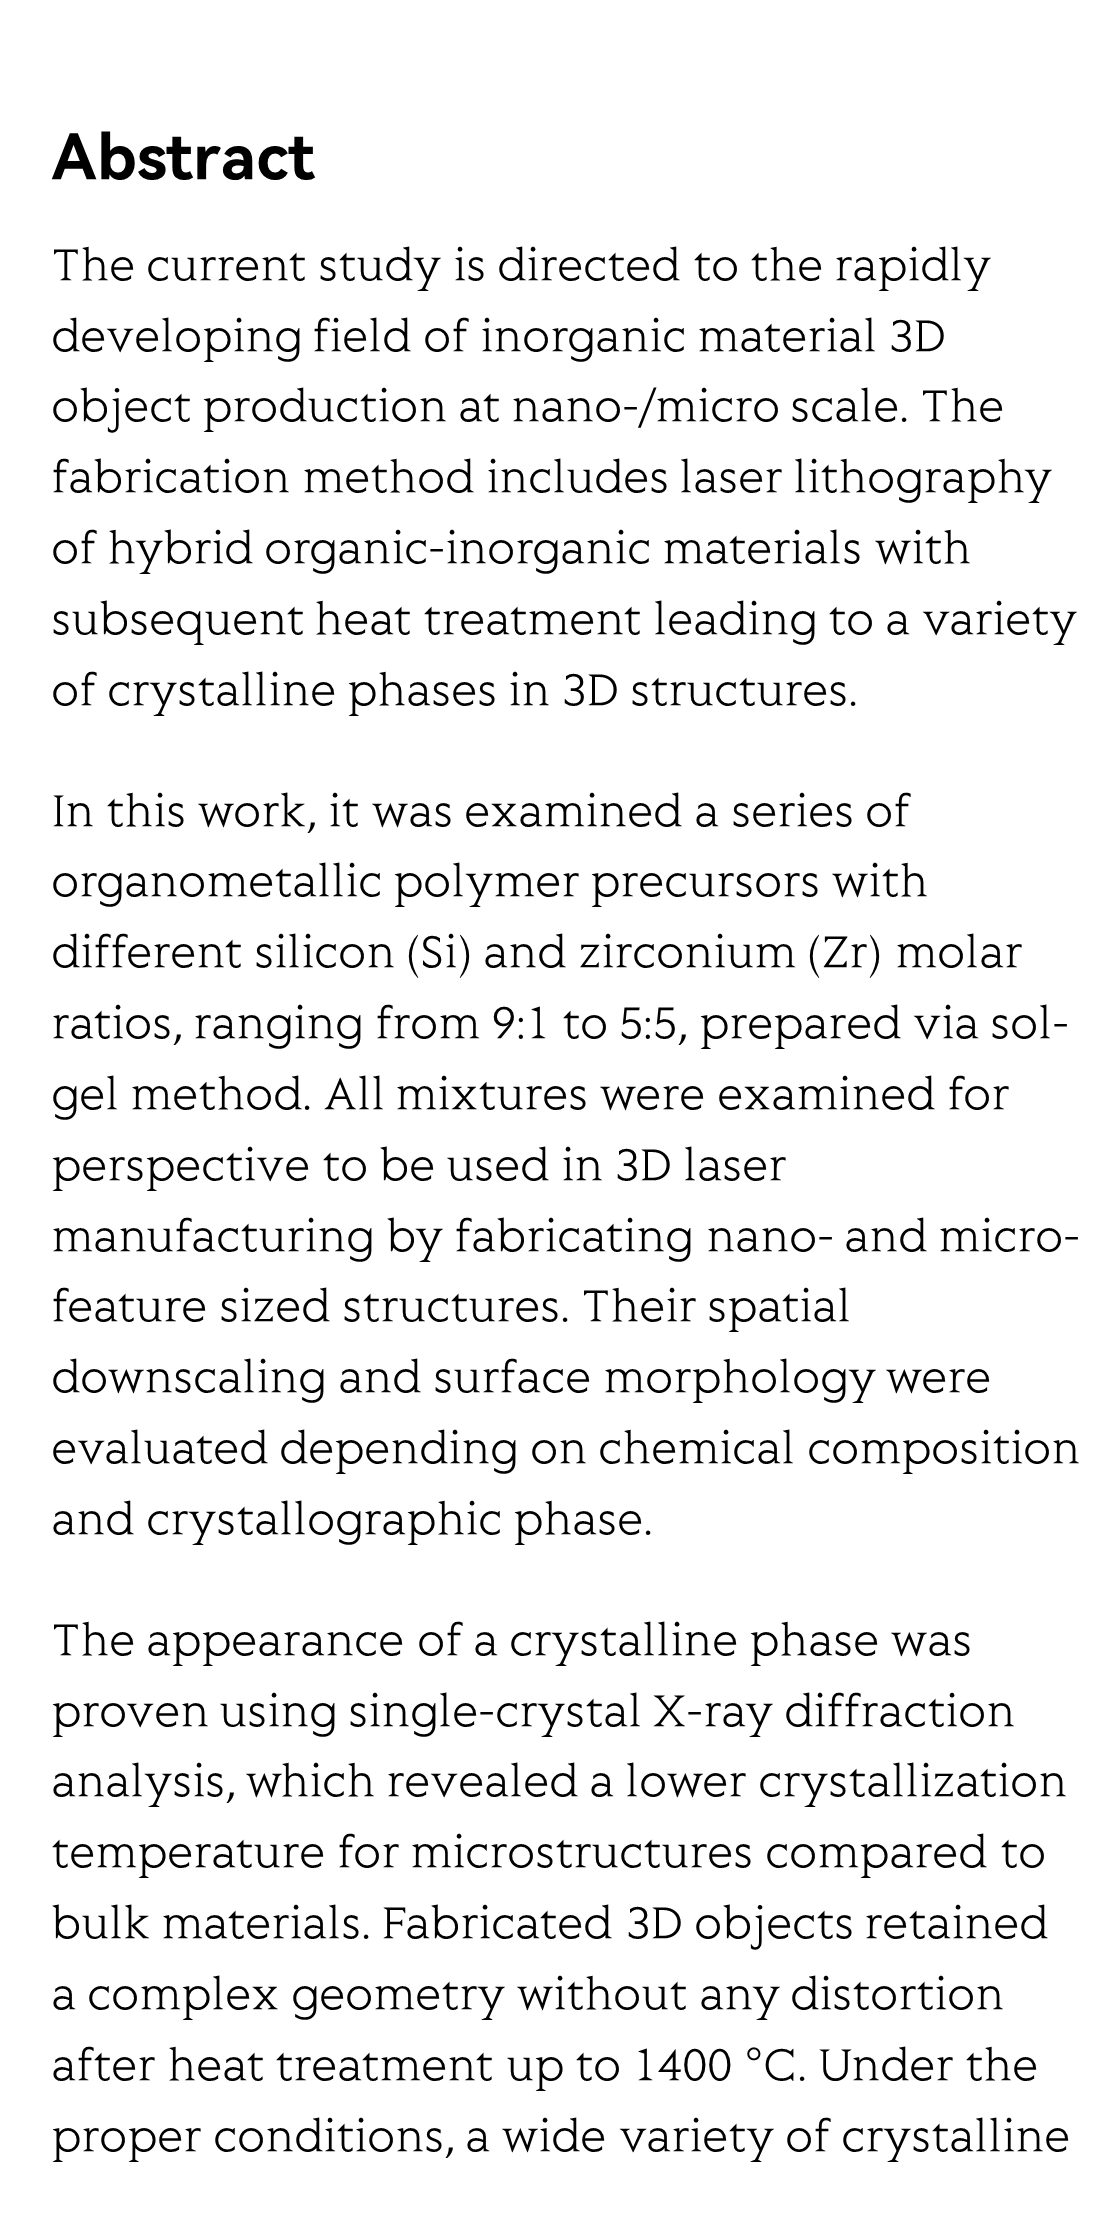 Laser additive manufacturing of Si/ZrO2 tunable crystalline phase 3D nanostructures_2